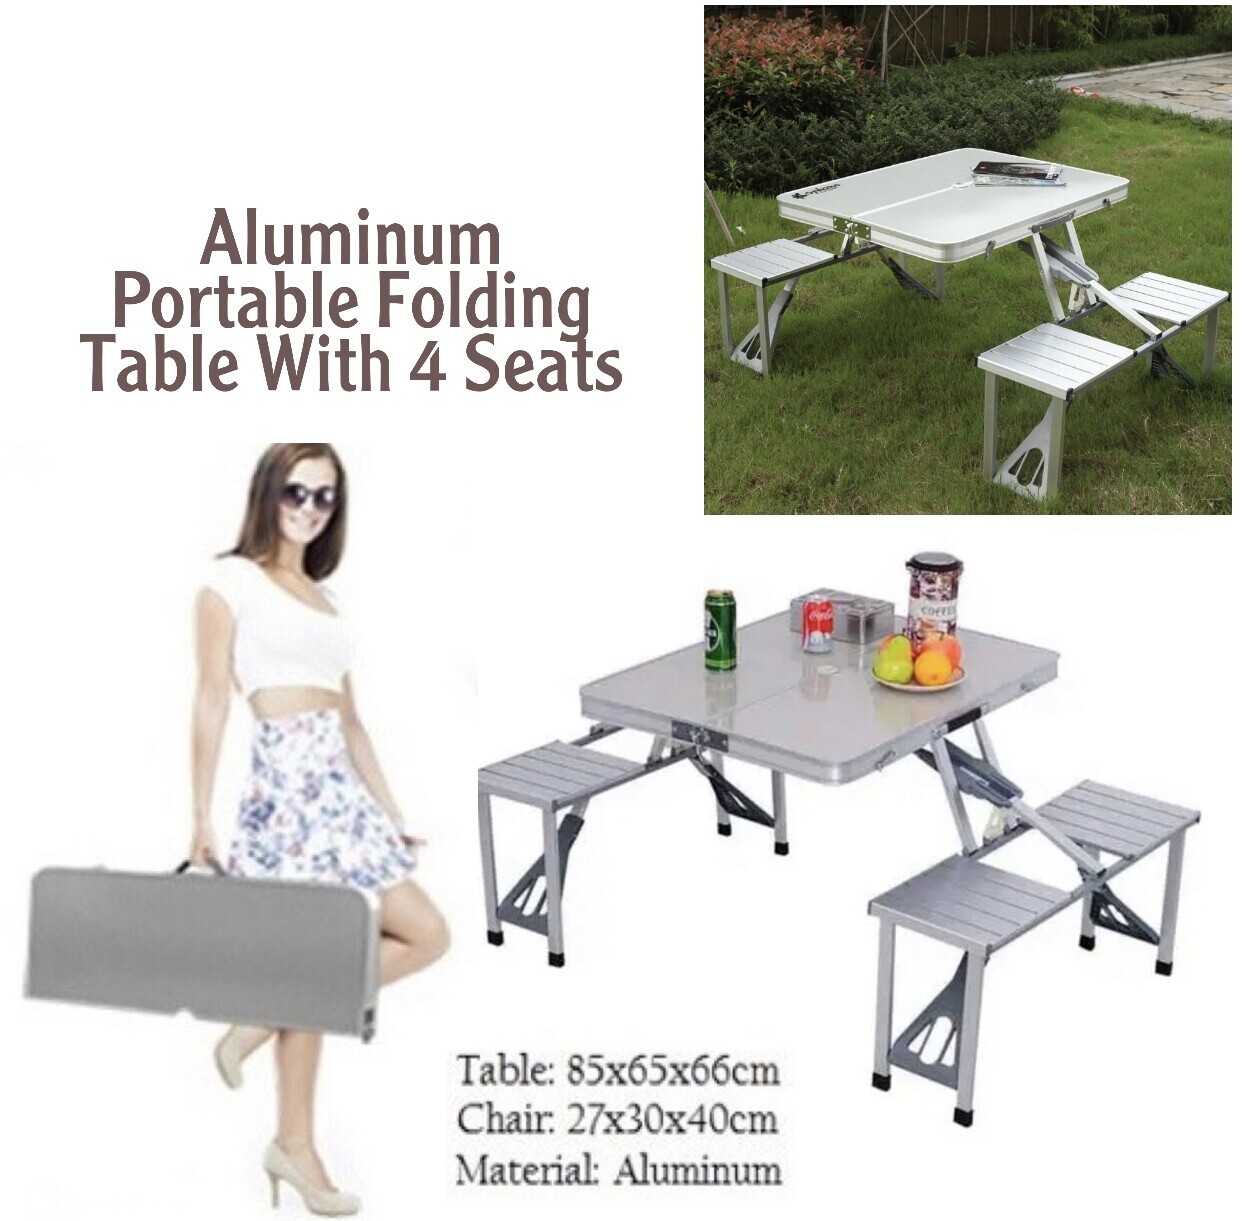 Table With 4 Seats